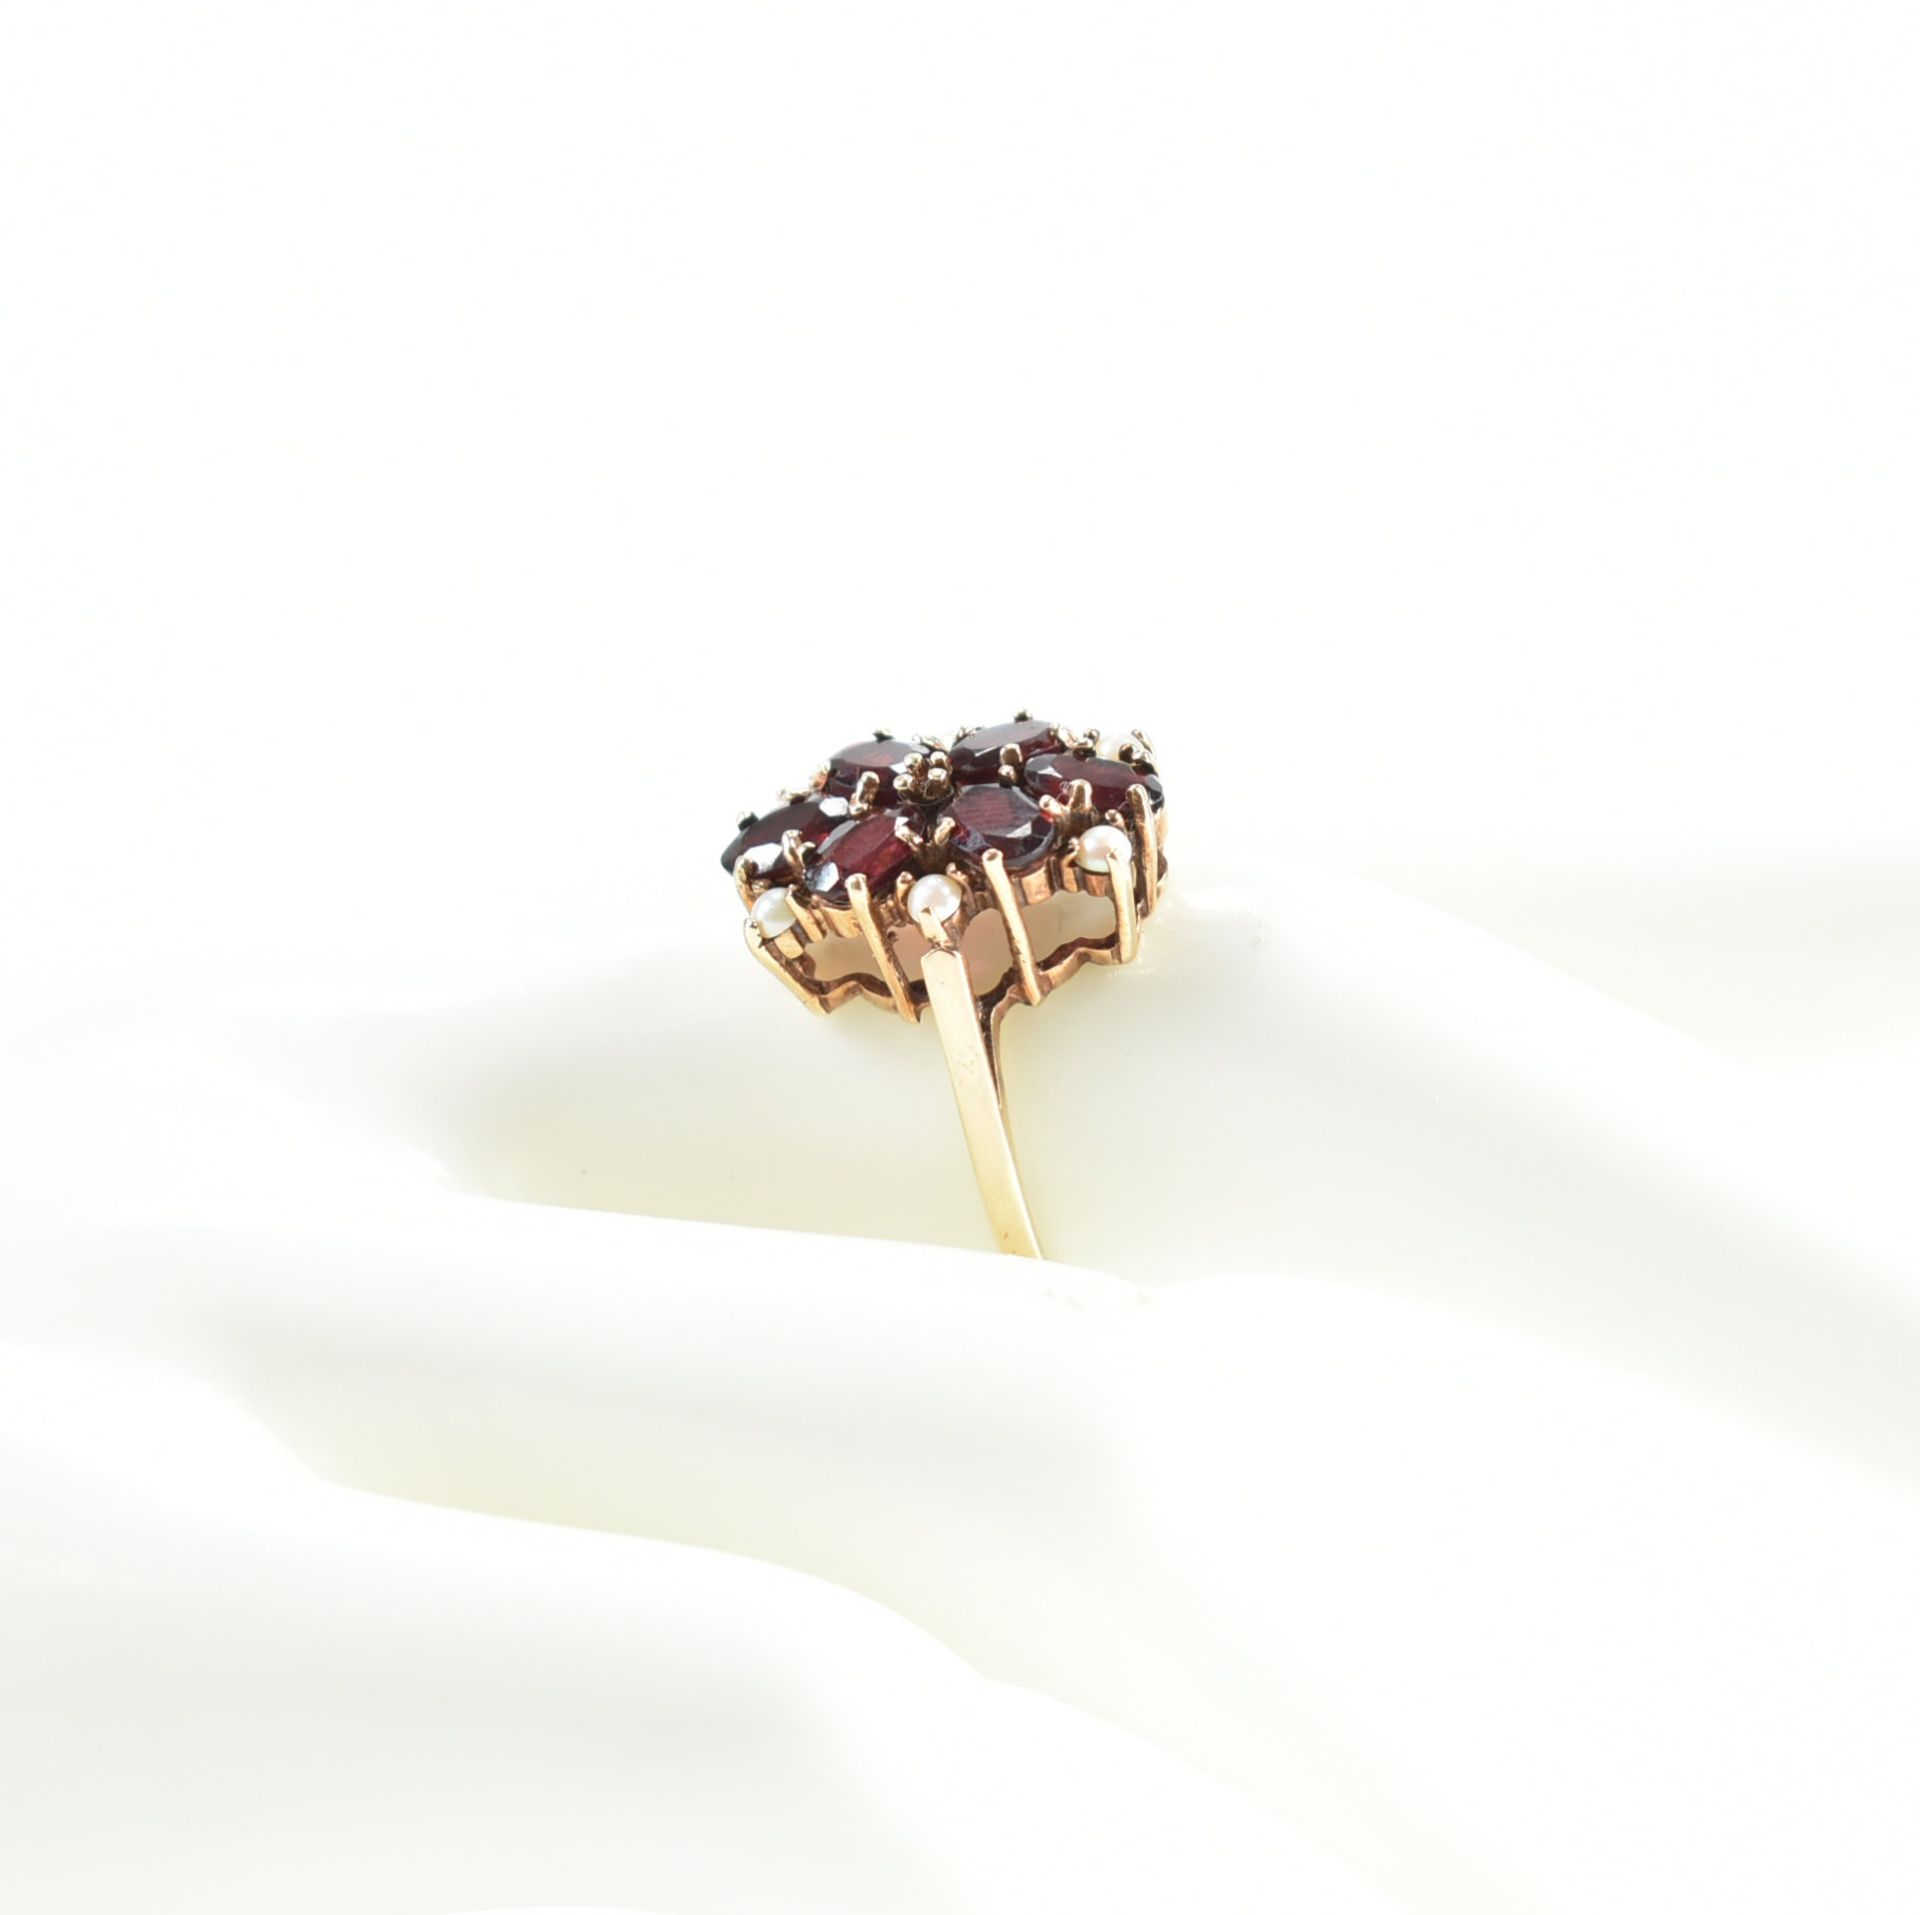 HALLMARKED 9CT GOLD GARNET & PEARL CLUSTER RING - Image 11 of 11